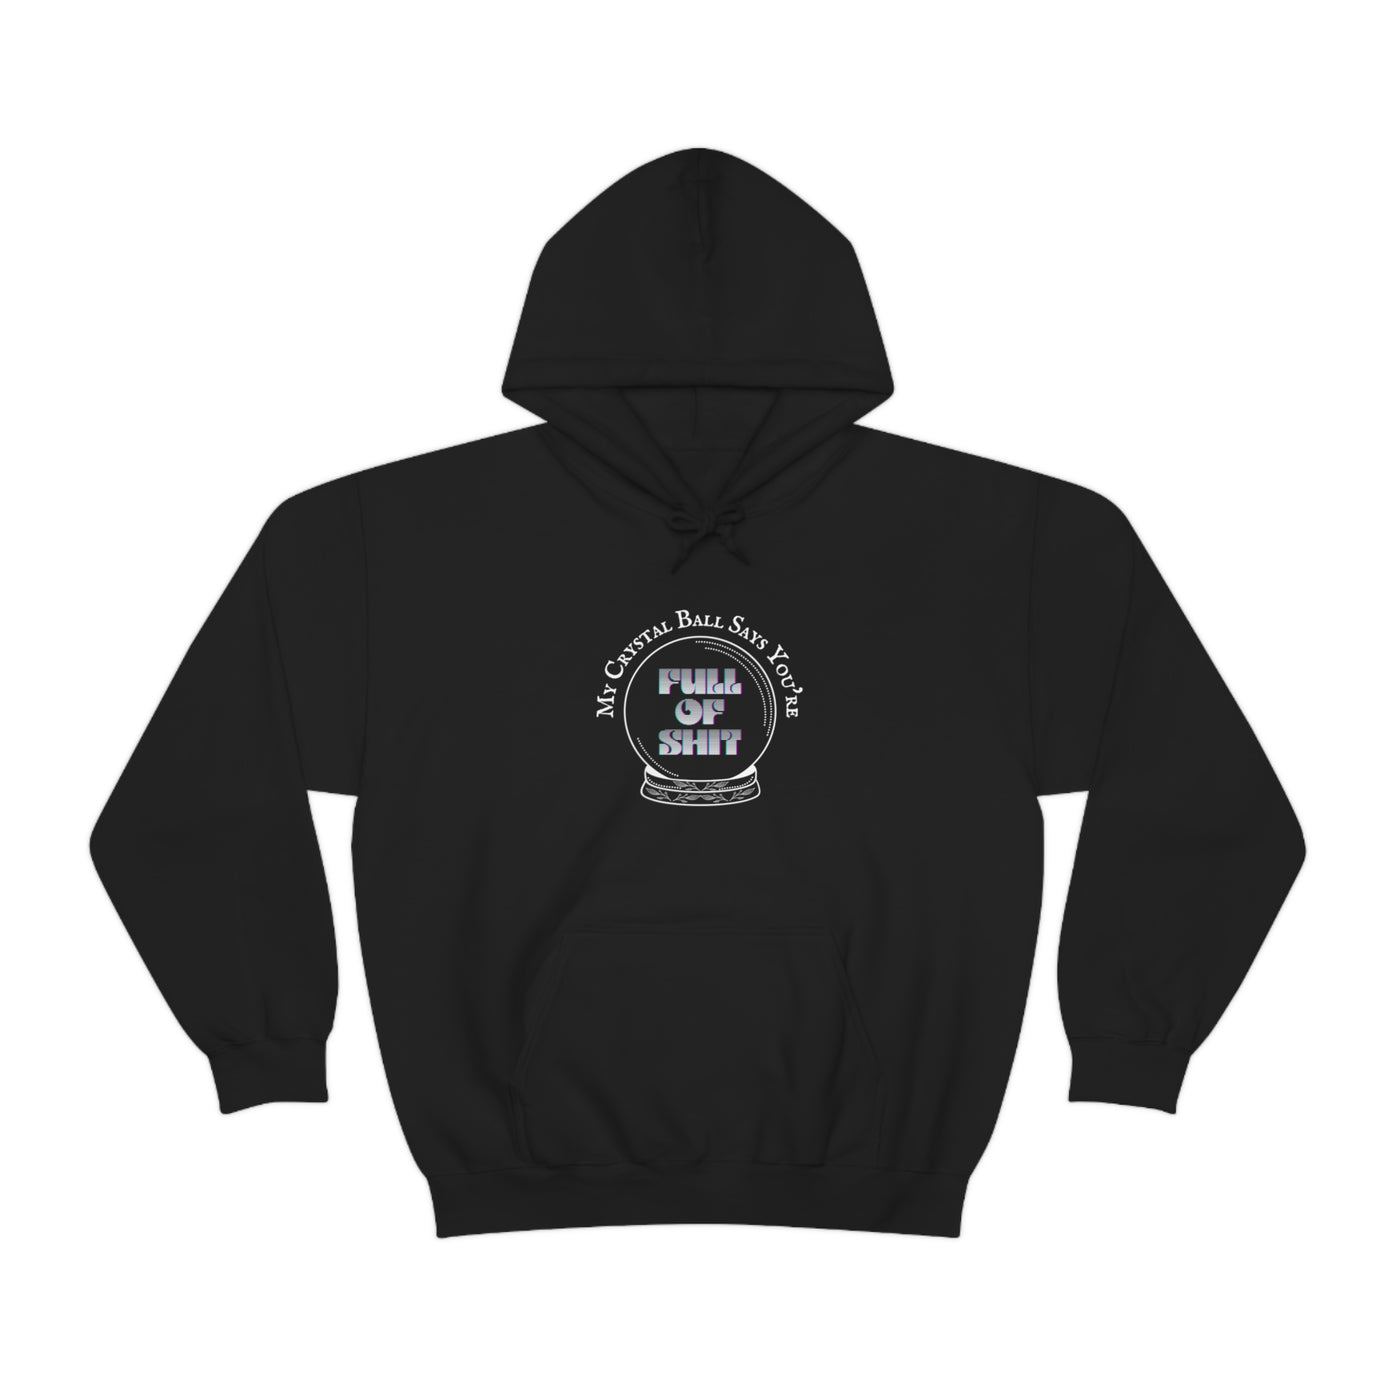 My Crystal Ball Says You're Full of Shit Unisex Hoodie